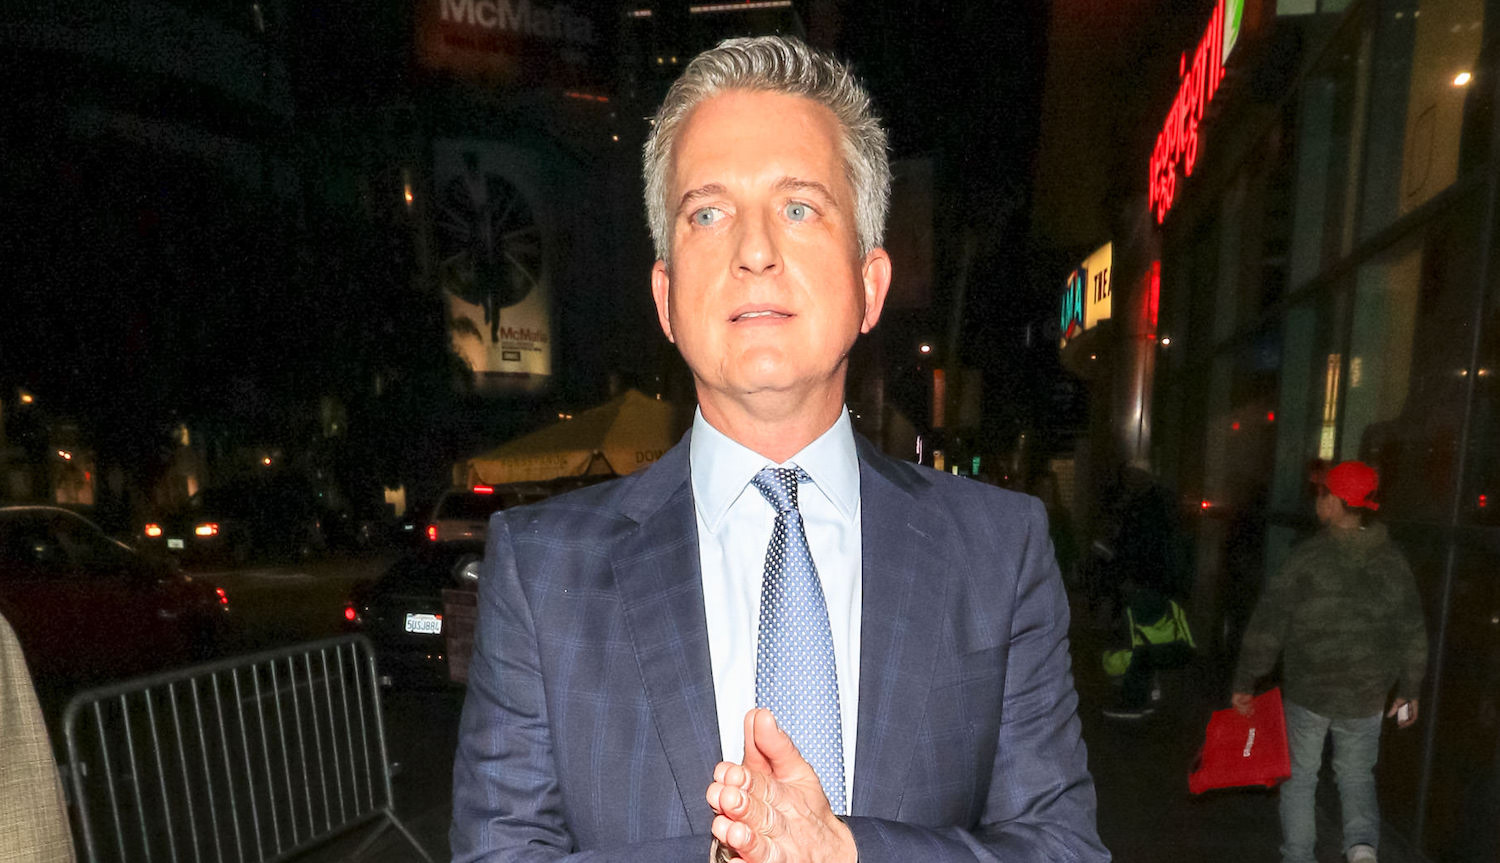 LOS ANGELES, CA - MARCH 29: Bill Simmons is seen on March 29, 2018 in Los Angeles, California. (Photo by gotpap/Bauer-Griffin/GC Images)